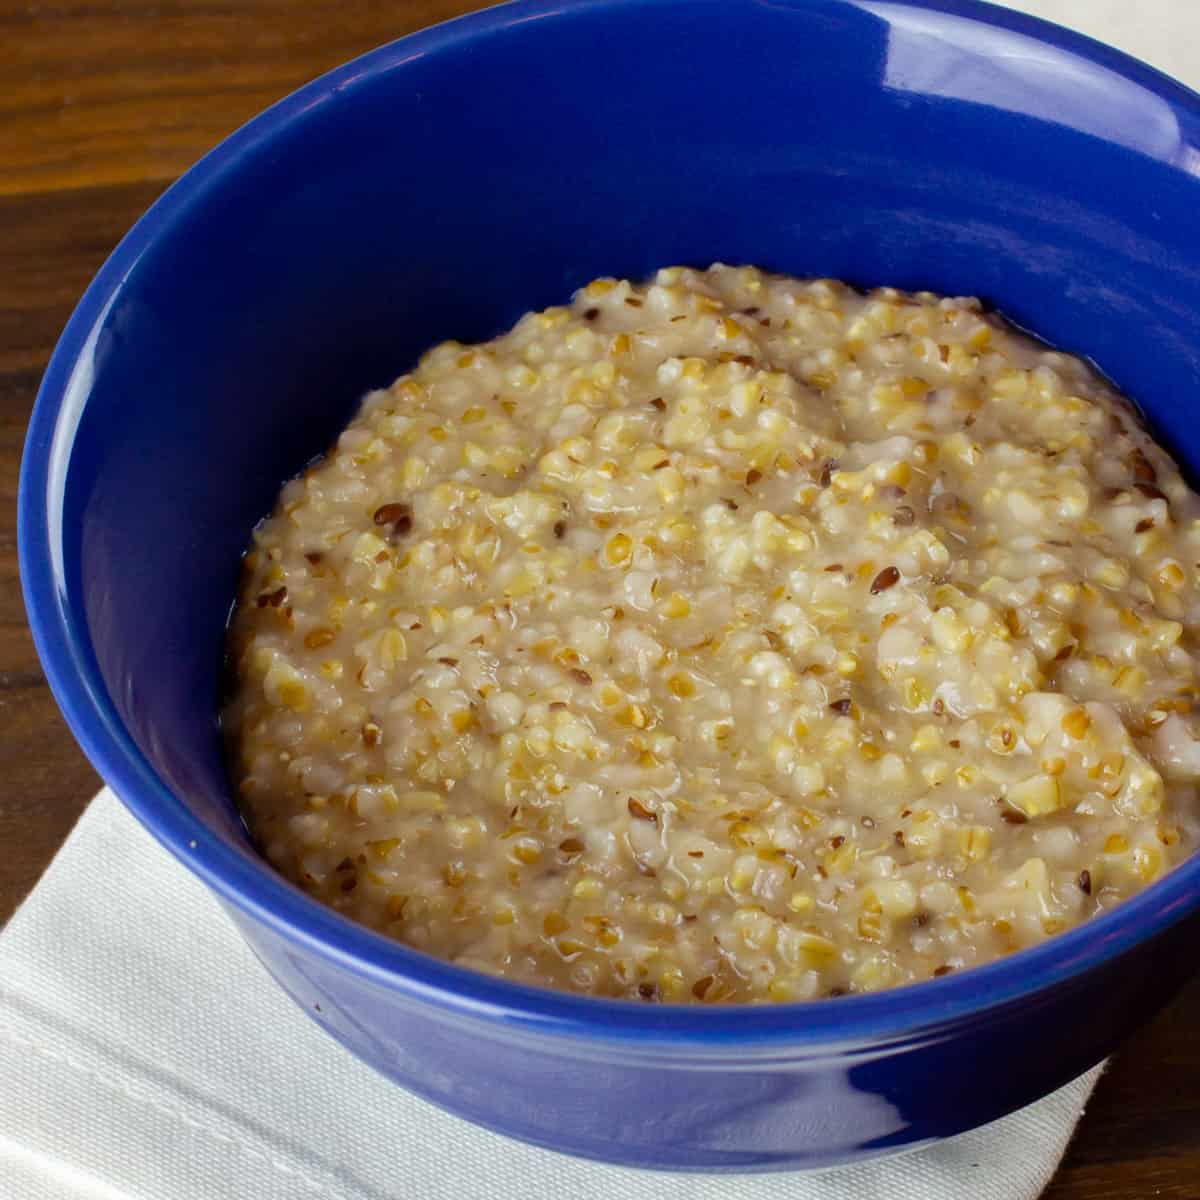 A cereal bowl filled with cooked oatmeal.